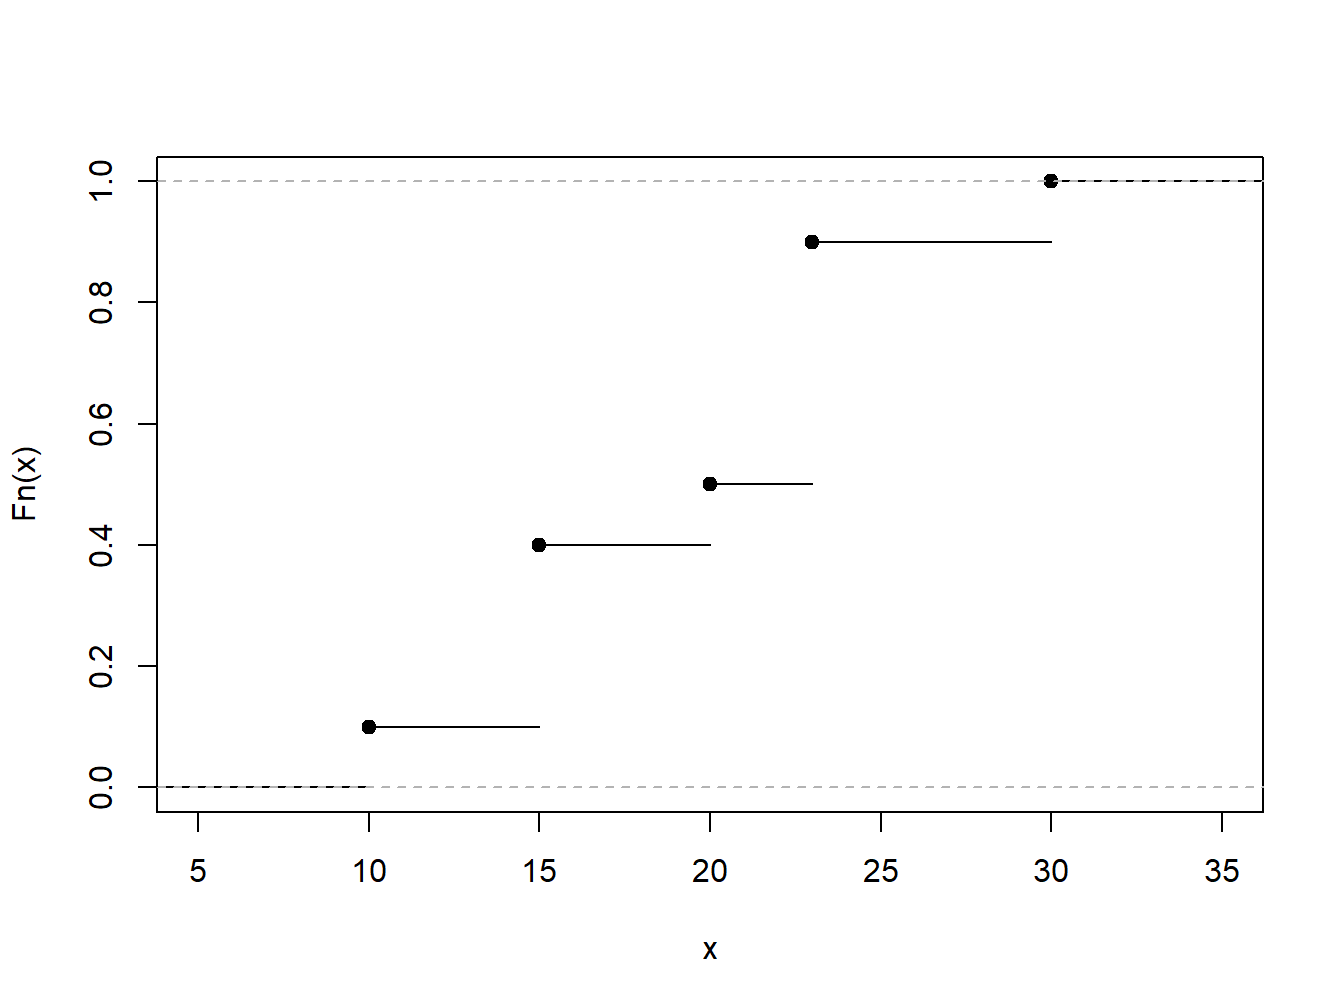 Empirical Distribution Function of a Toy Example